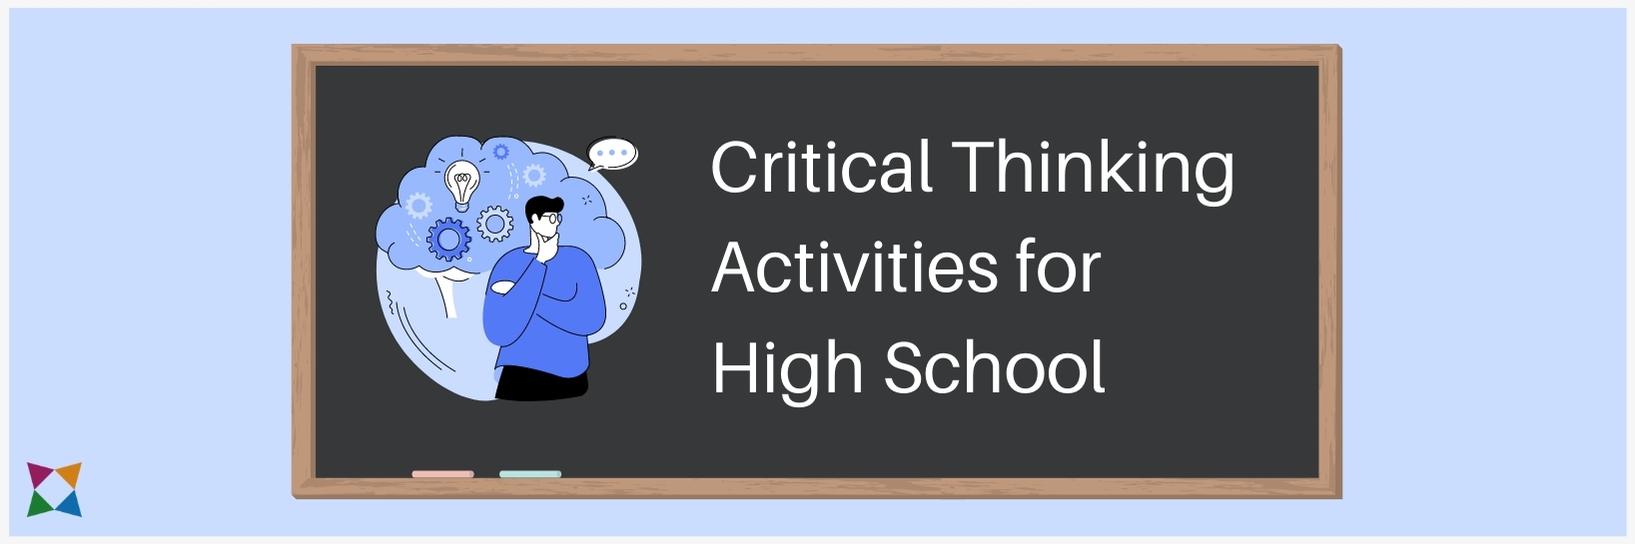 critical thinking in classroom activities